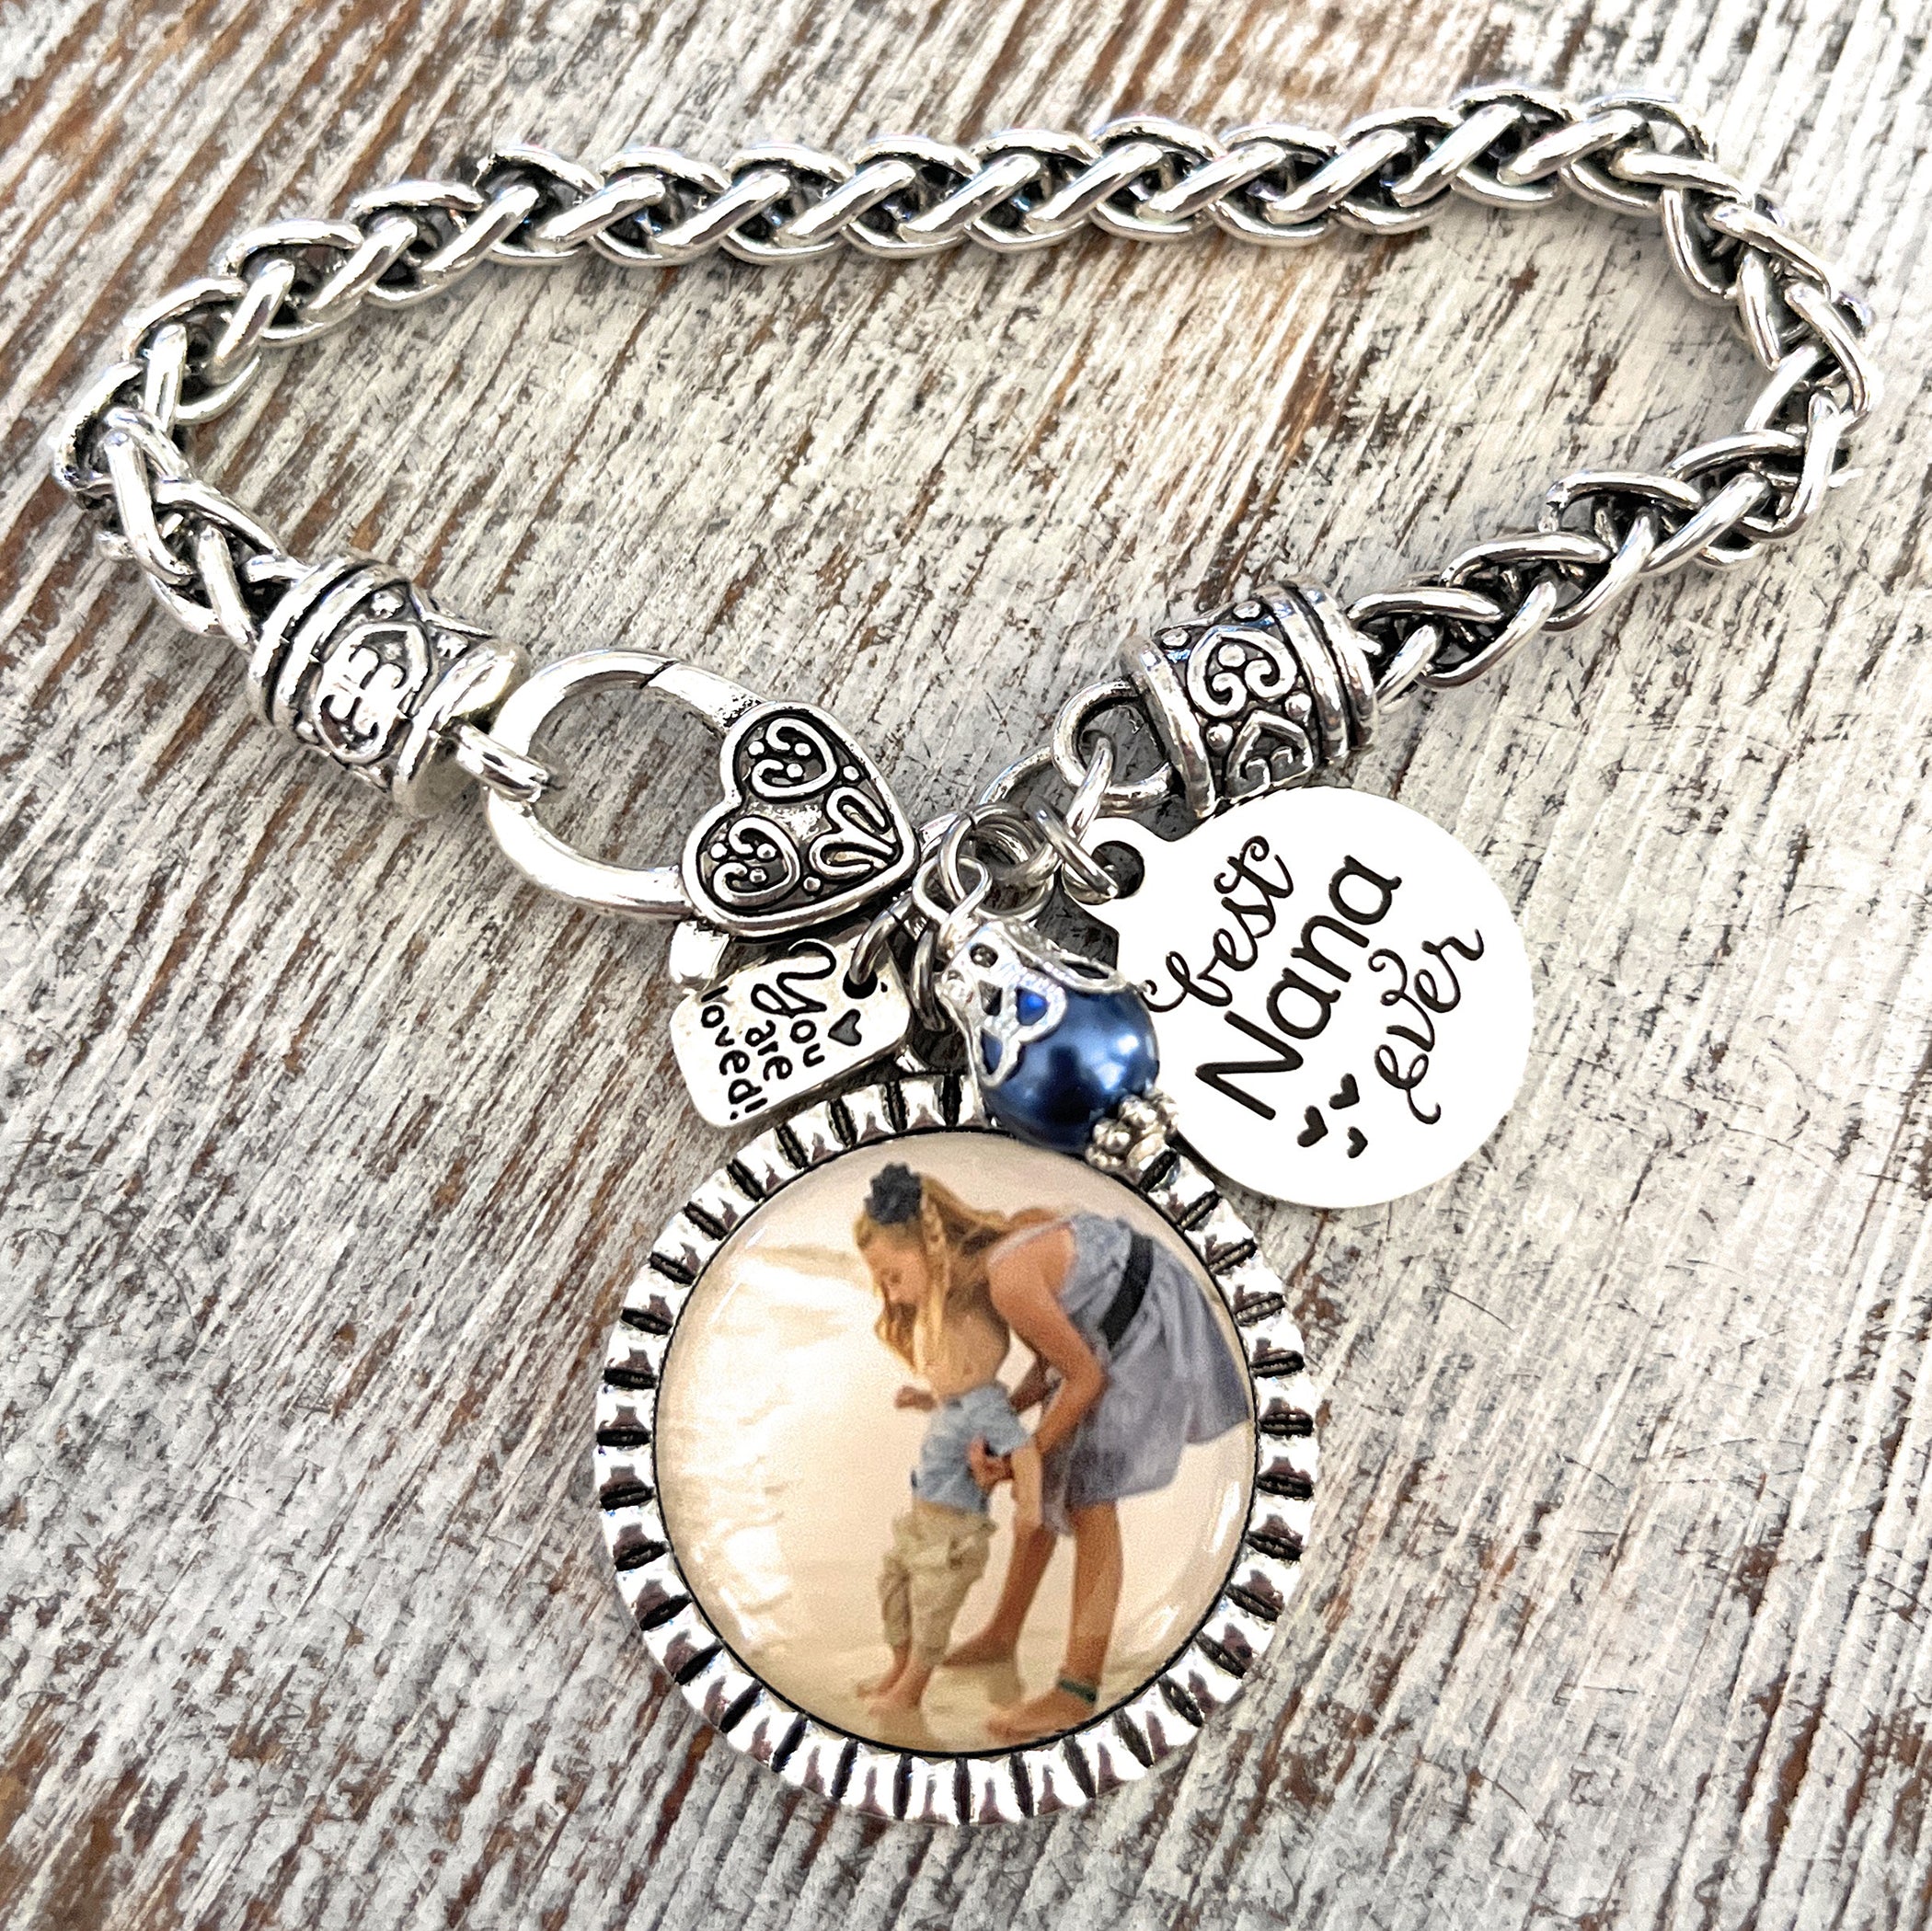 best nana ever bracelet for grandma with photograph of grandkids and you are loved charm. Custom photo jewelry